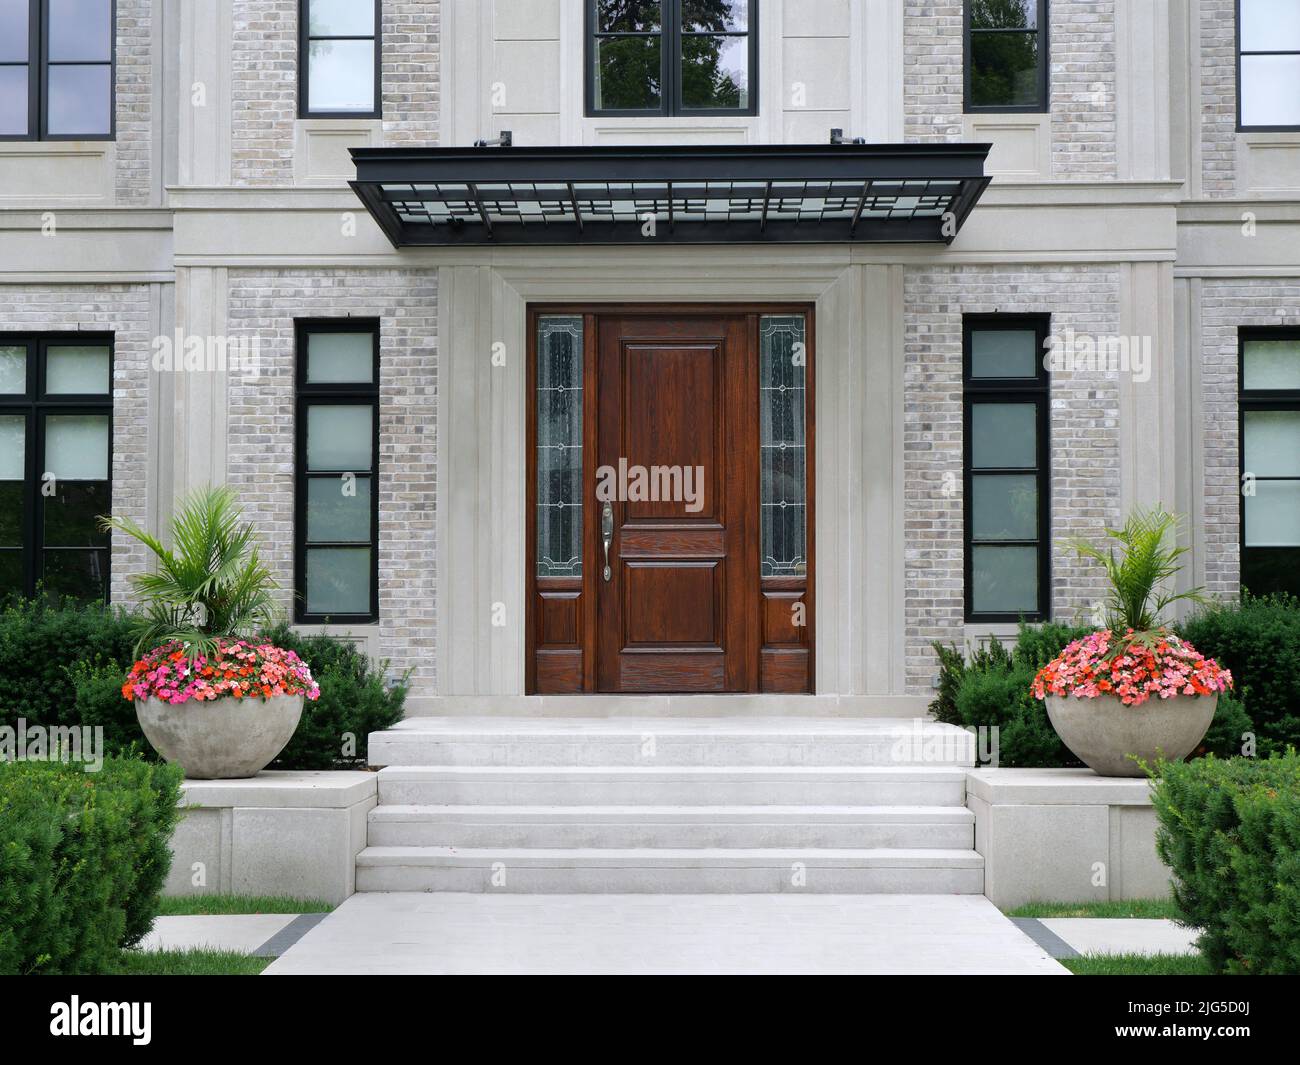 House entrance with elegant wood grain front door with sidelights Stock Photo